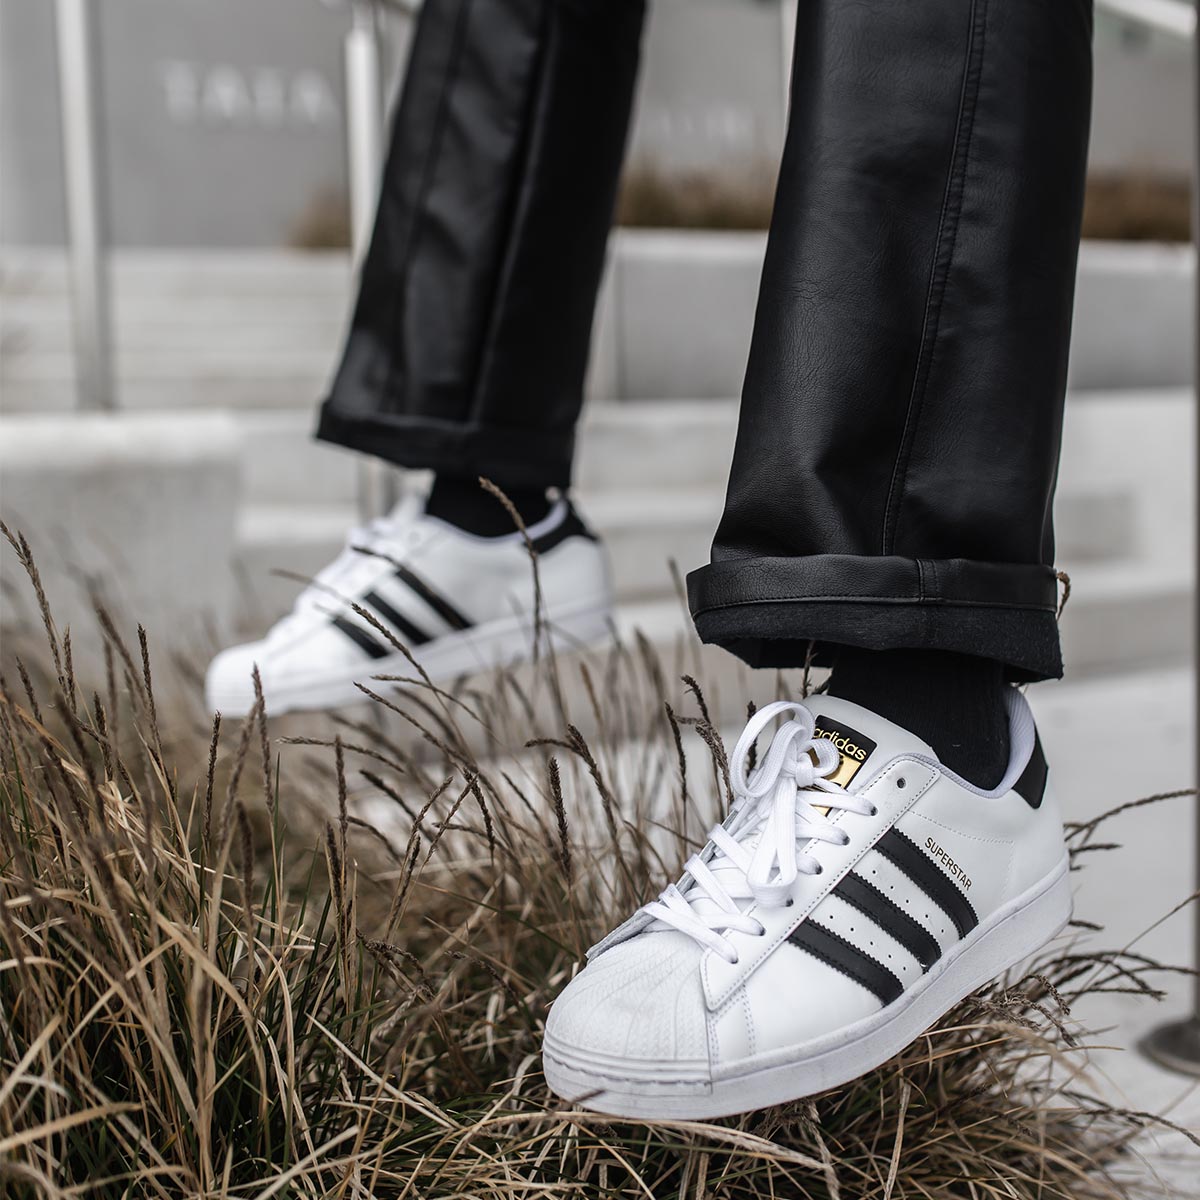 How to the adidas Superstar